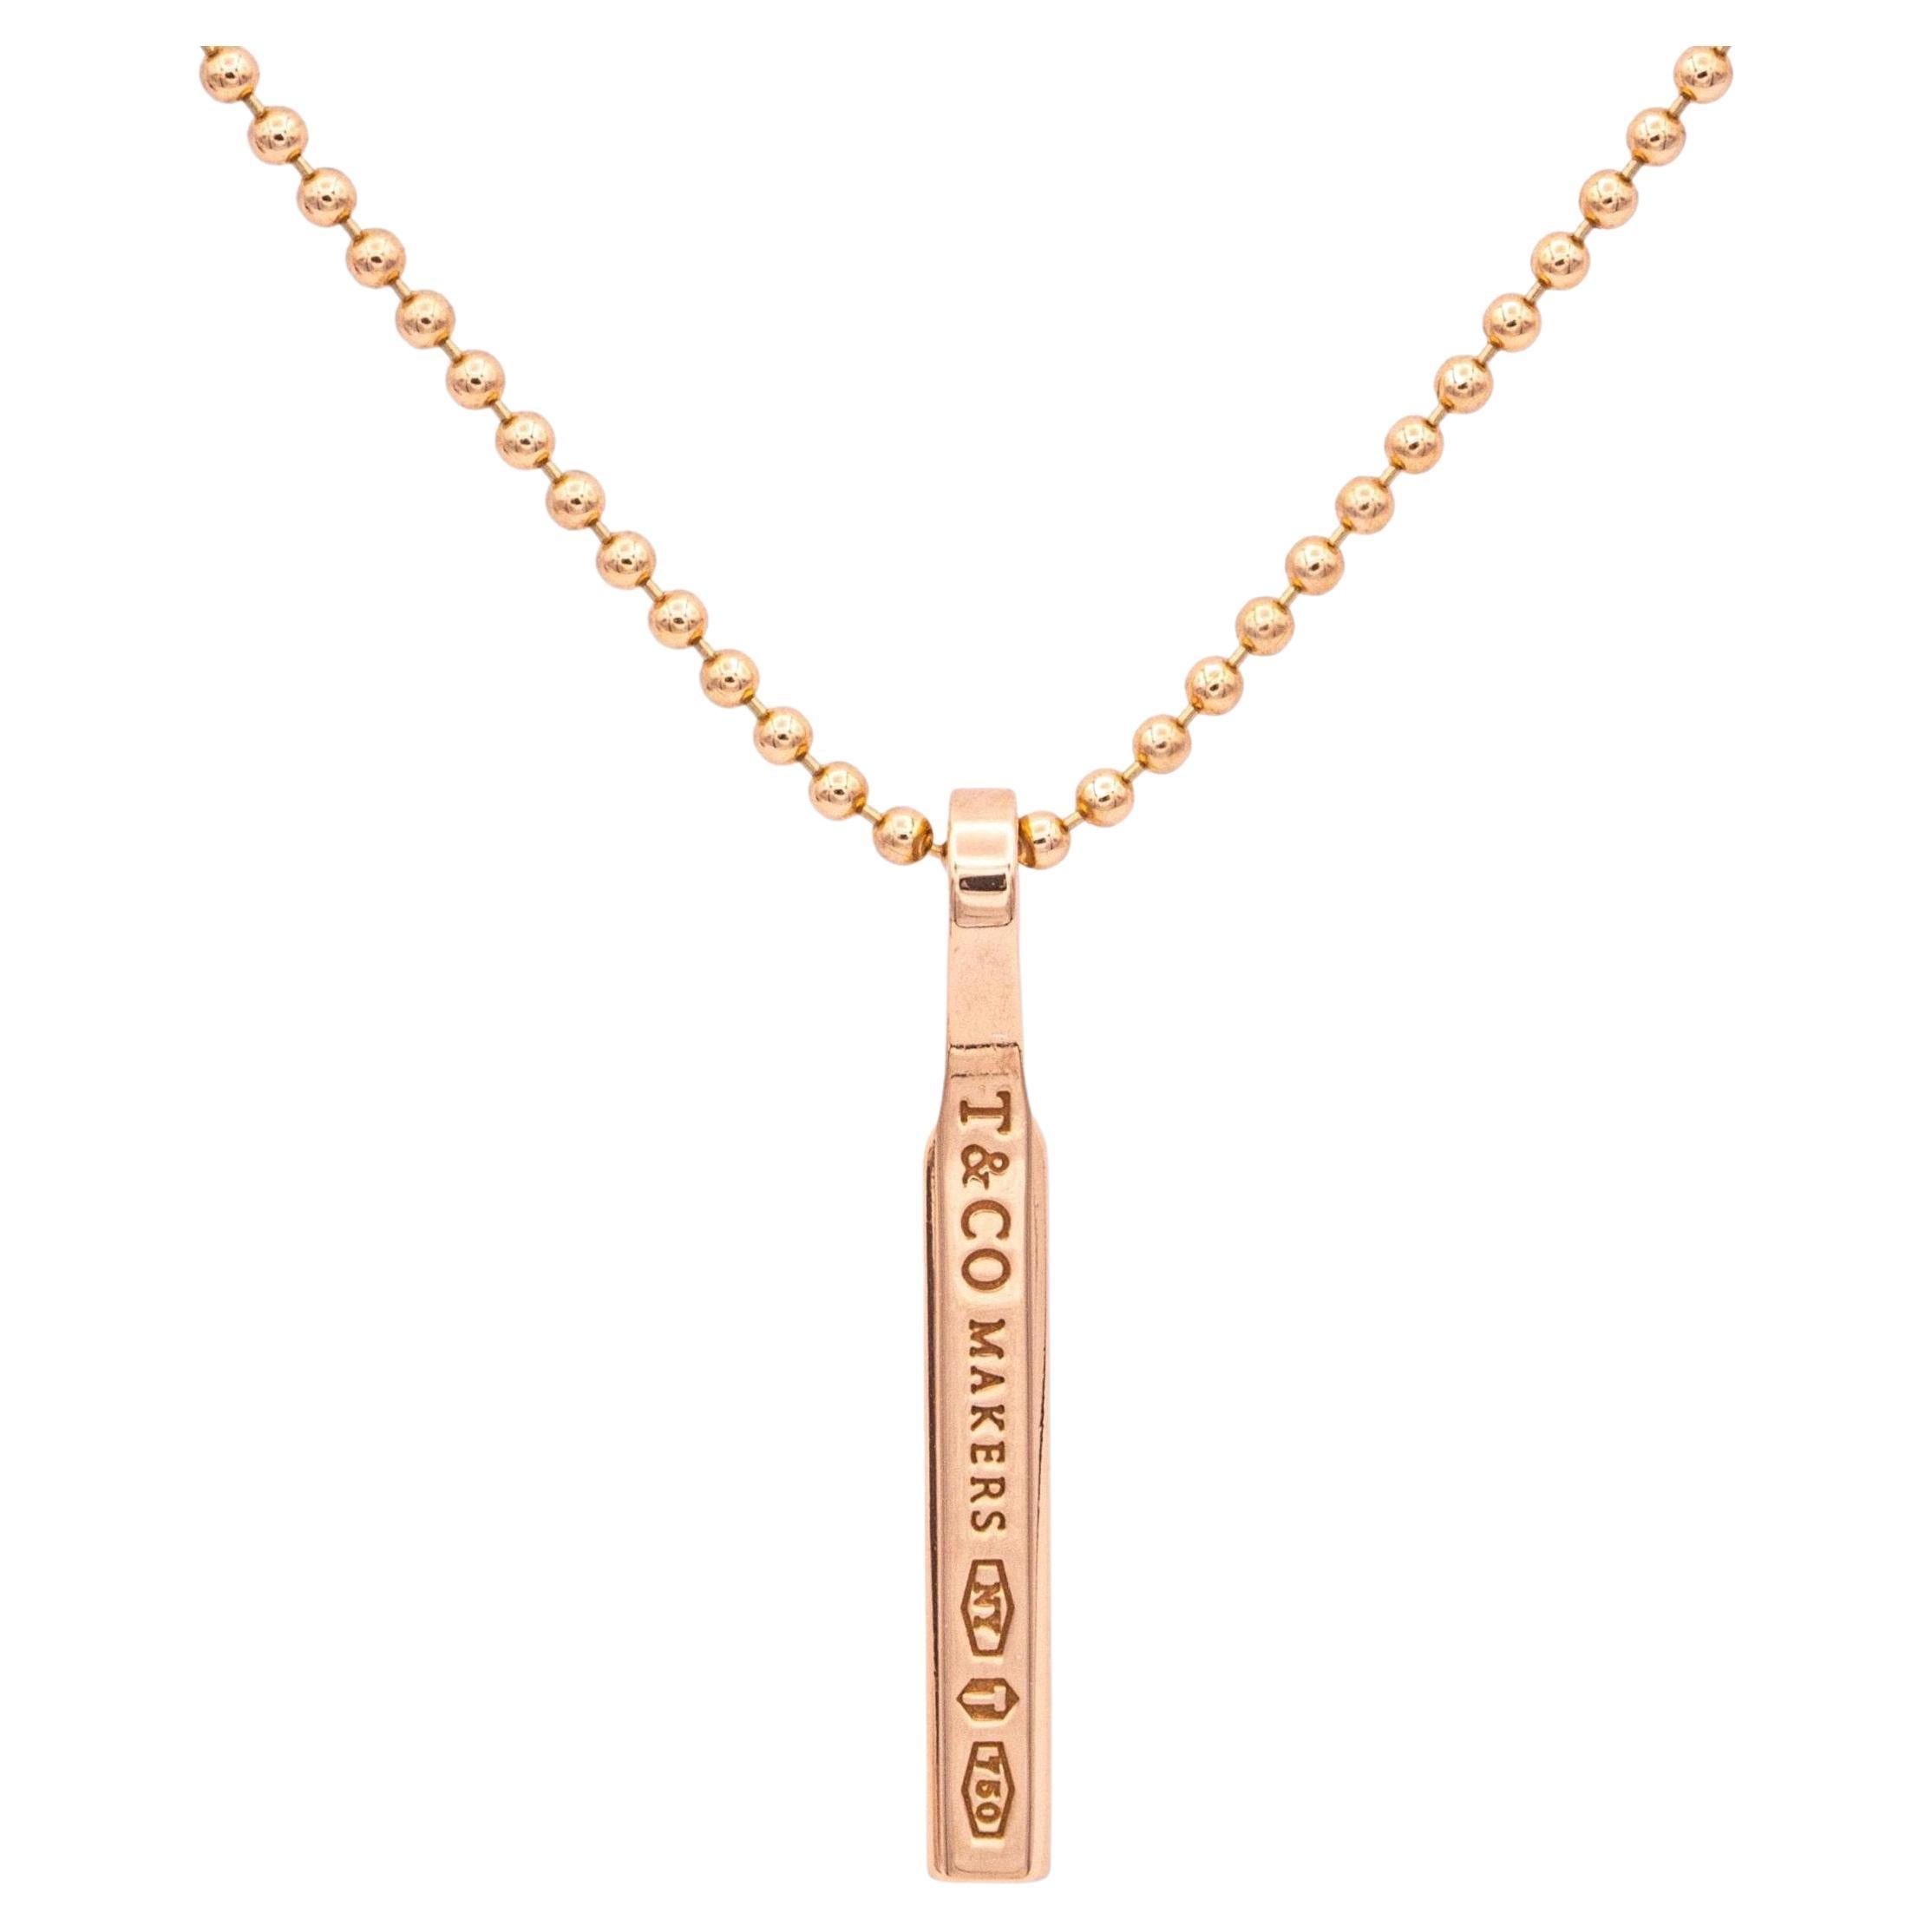 Tiffany 1837 Makers ID Tag Pendant in 18K Gold, 24